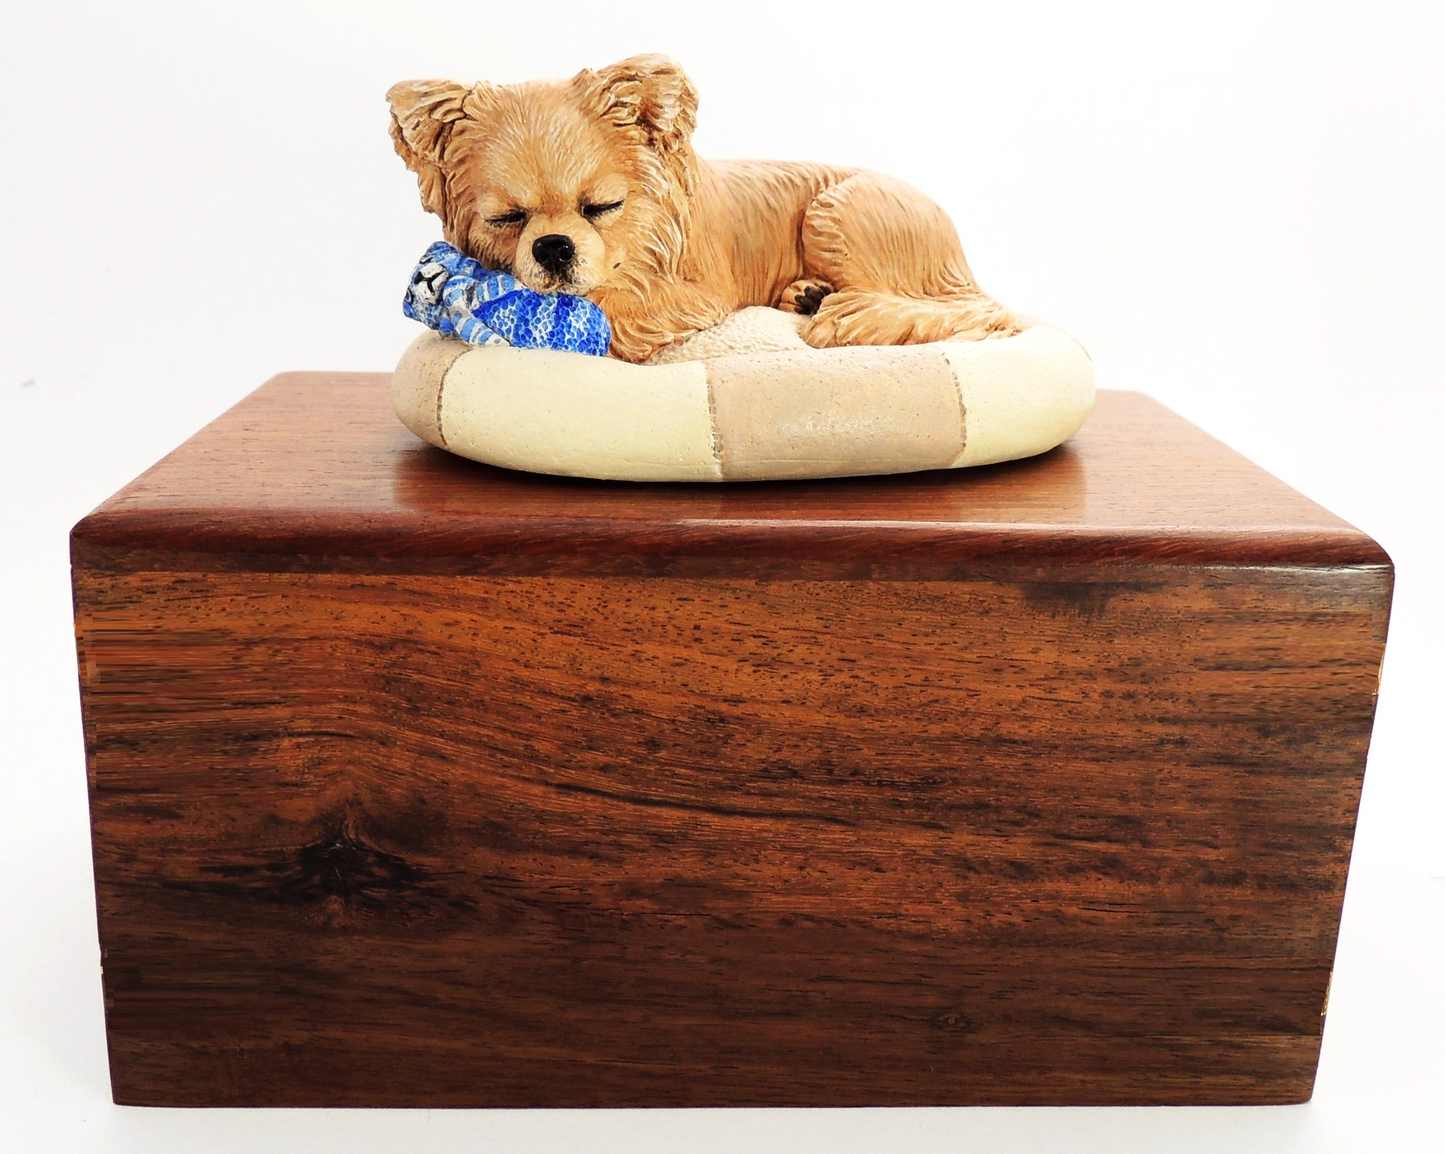 Wooden Cremation Urn For Long-coated Chihuahua Pet Ashes